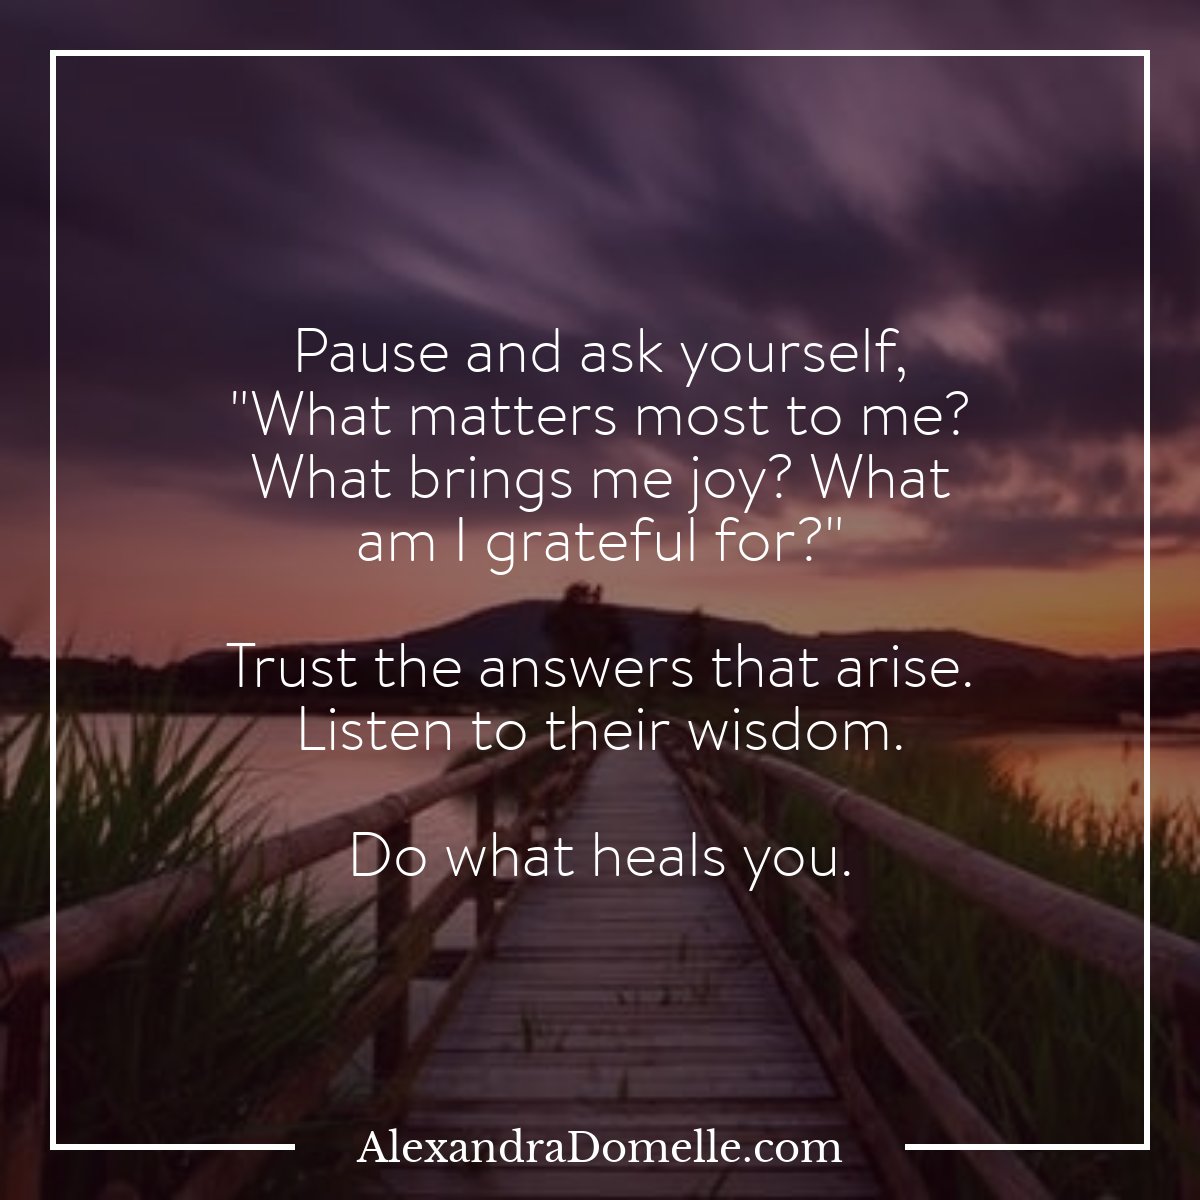 Pause and ask yourself, 'What matters most to me? What brings me joy? What am I grateful for?' Trust the answers that arise. Listen to their wisdom. Do what heals you. - Alexandra Domelle #Mindfulness #TheMindfulMoment #Meditation #PresentMomentReminder @MindfulOnline